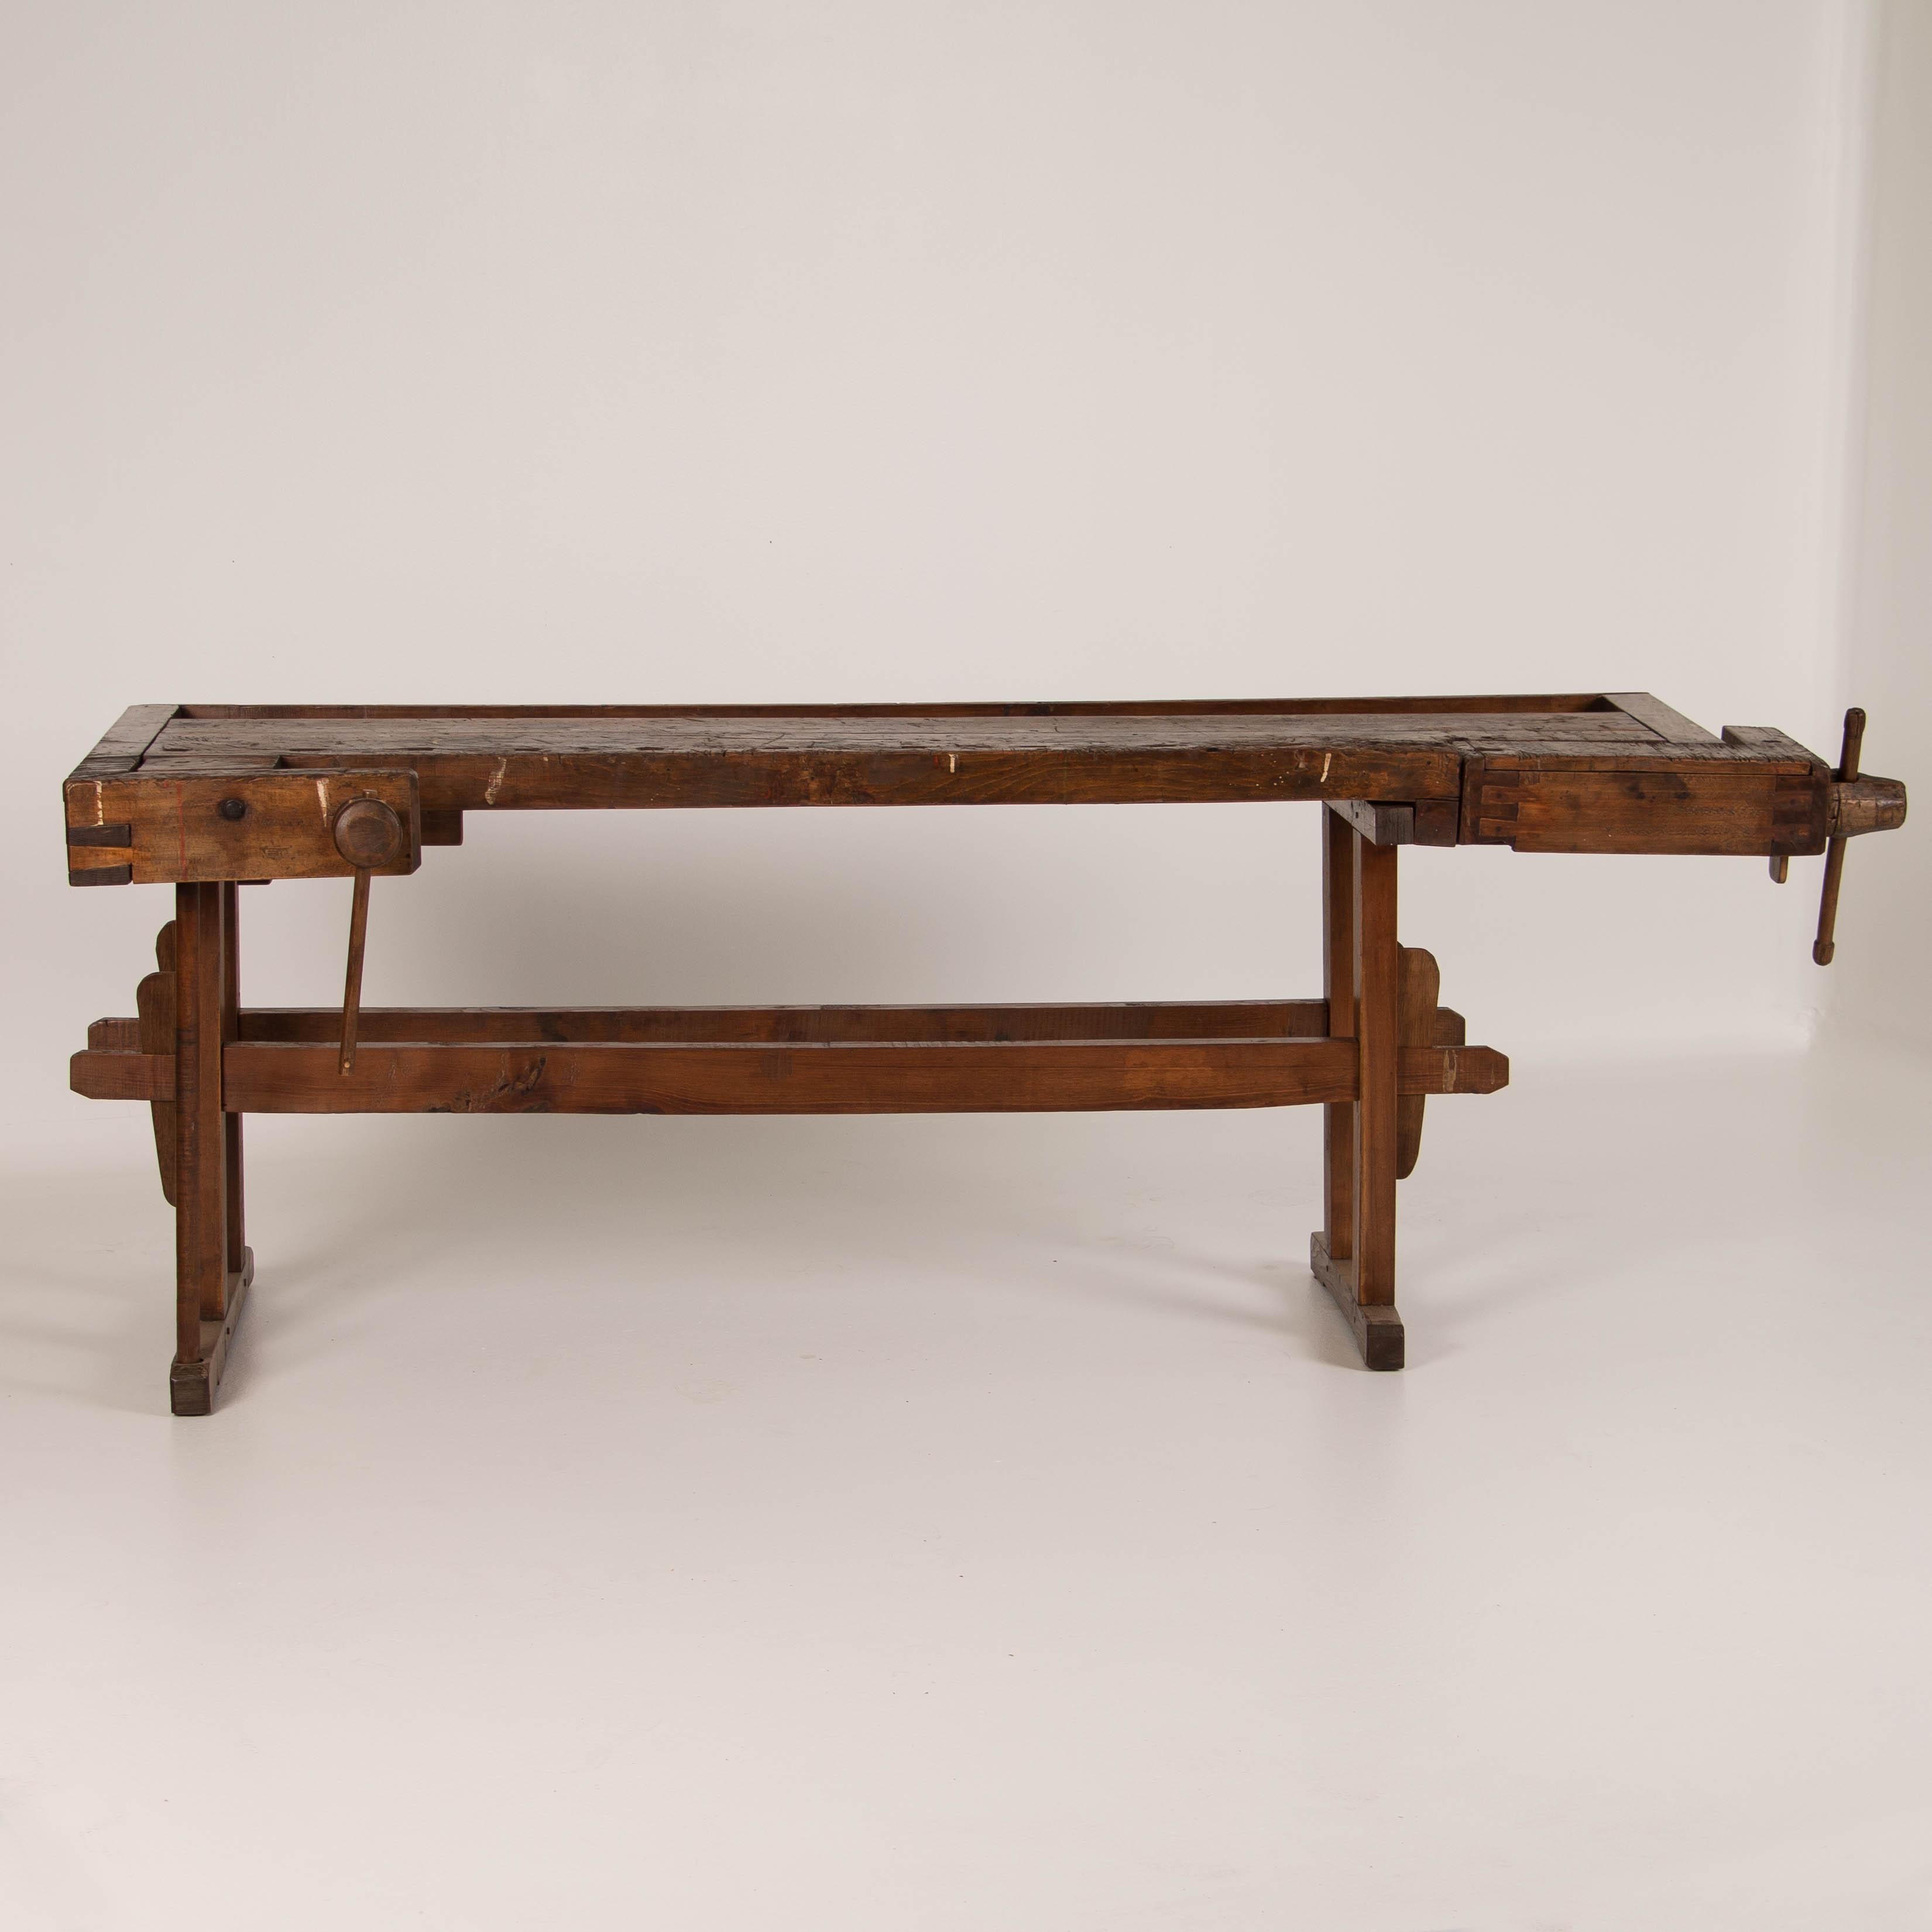 The depth of patina on this workbench comes from years of constant use. It has two wooden vices and a recessed tray where the carpenter would lay his tools. The traditional trestle base allowed it to be assembled and taken down/moved more easily.